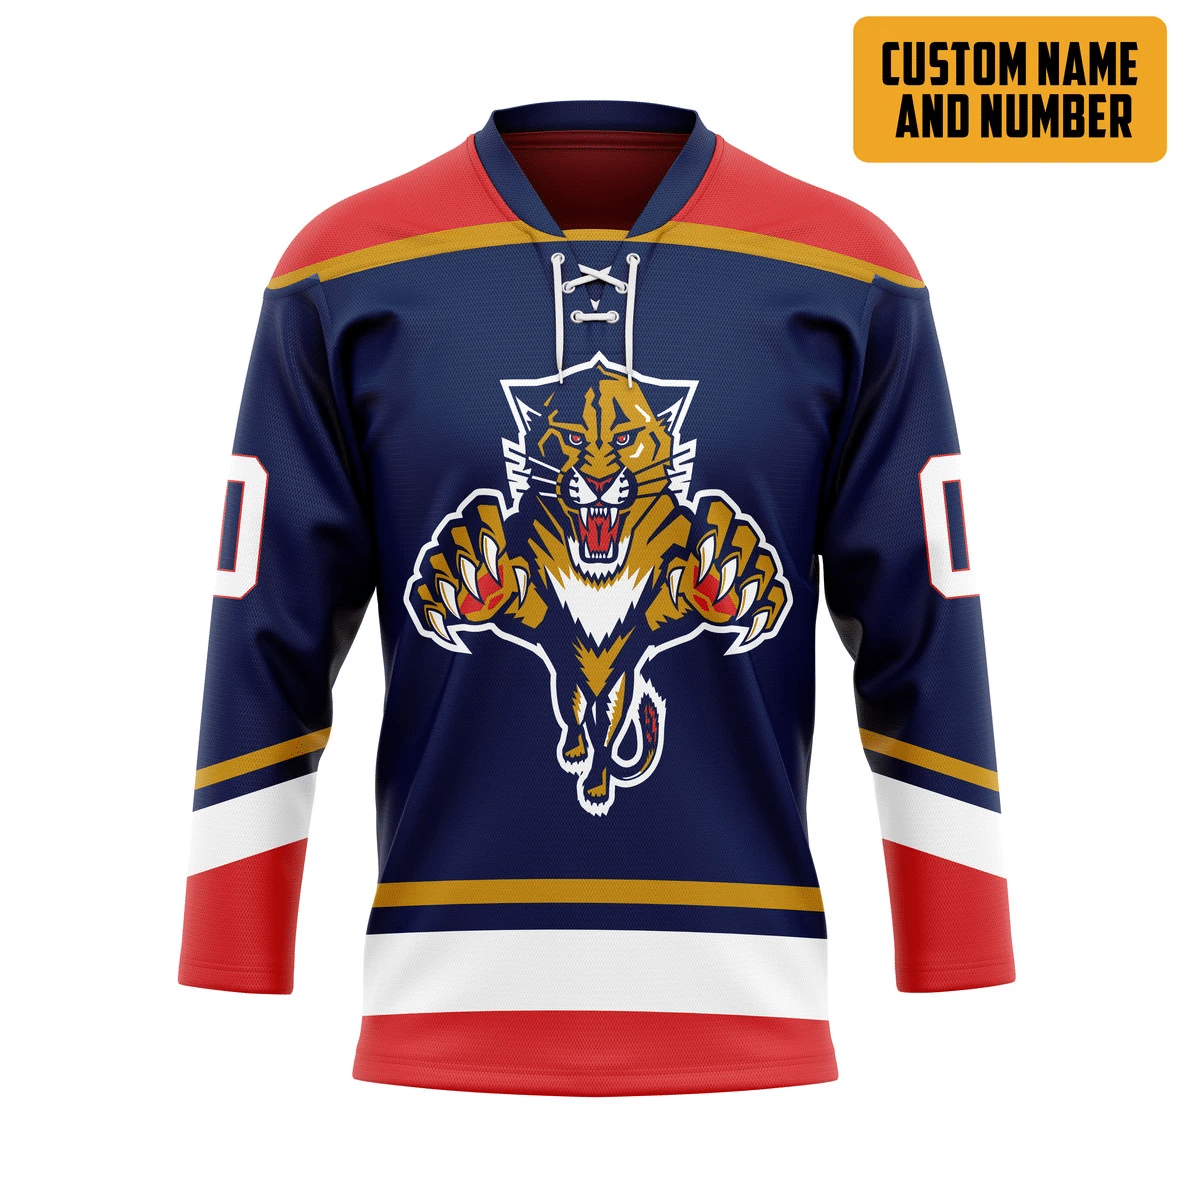 The style of a hockey jersey should match your personality. 78